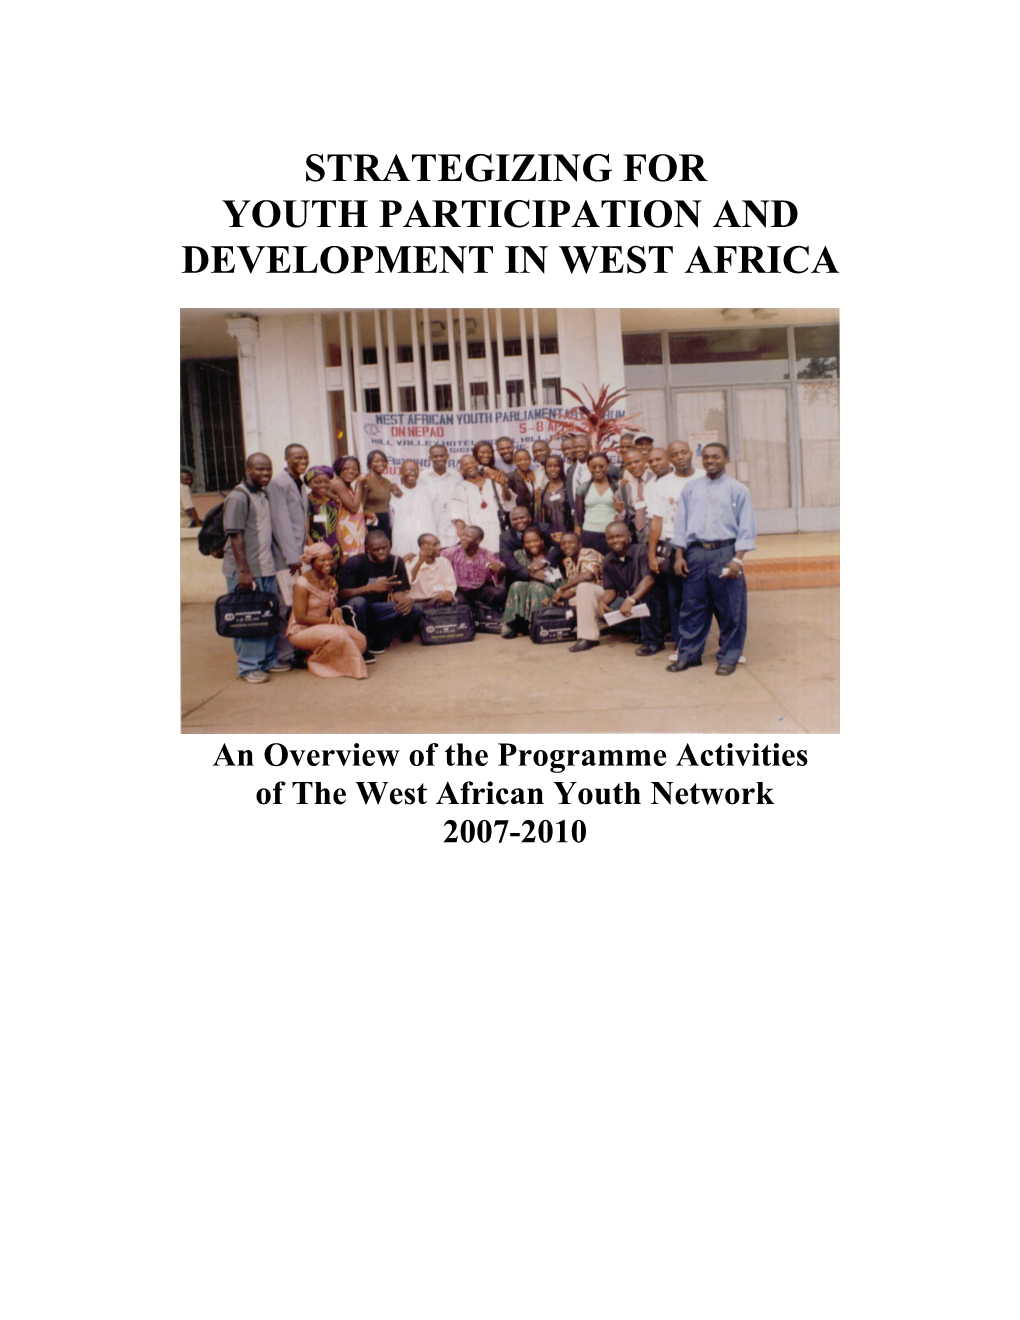 Youth Participation and Development in West Africa